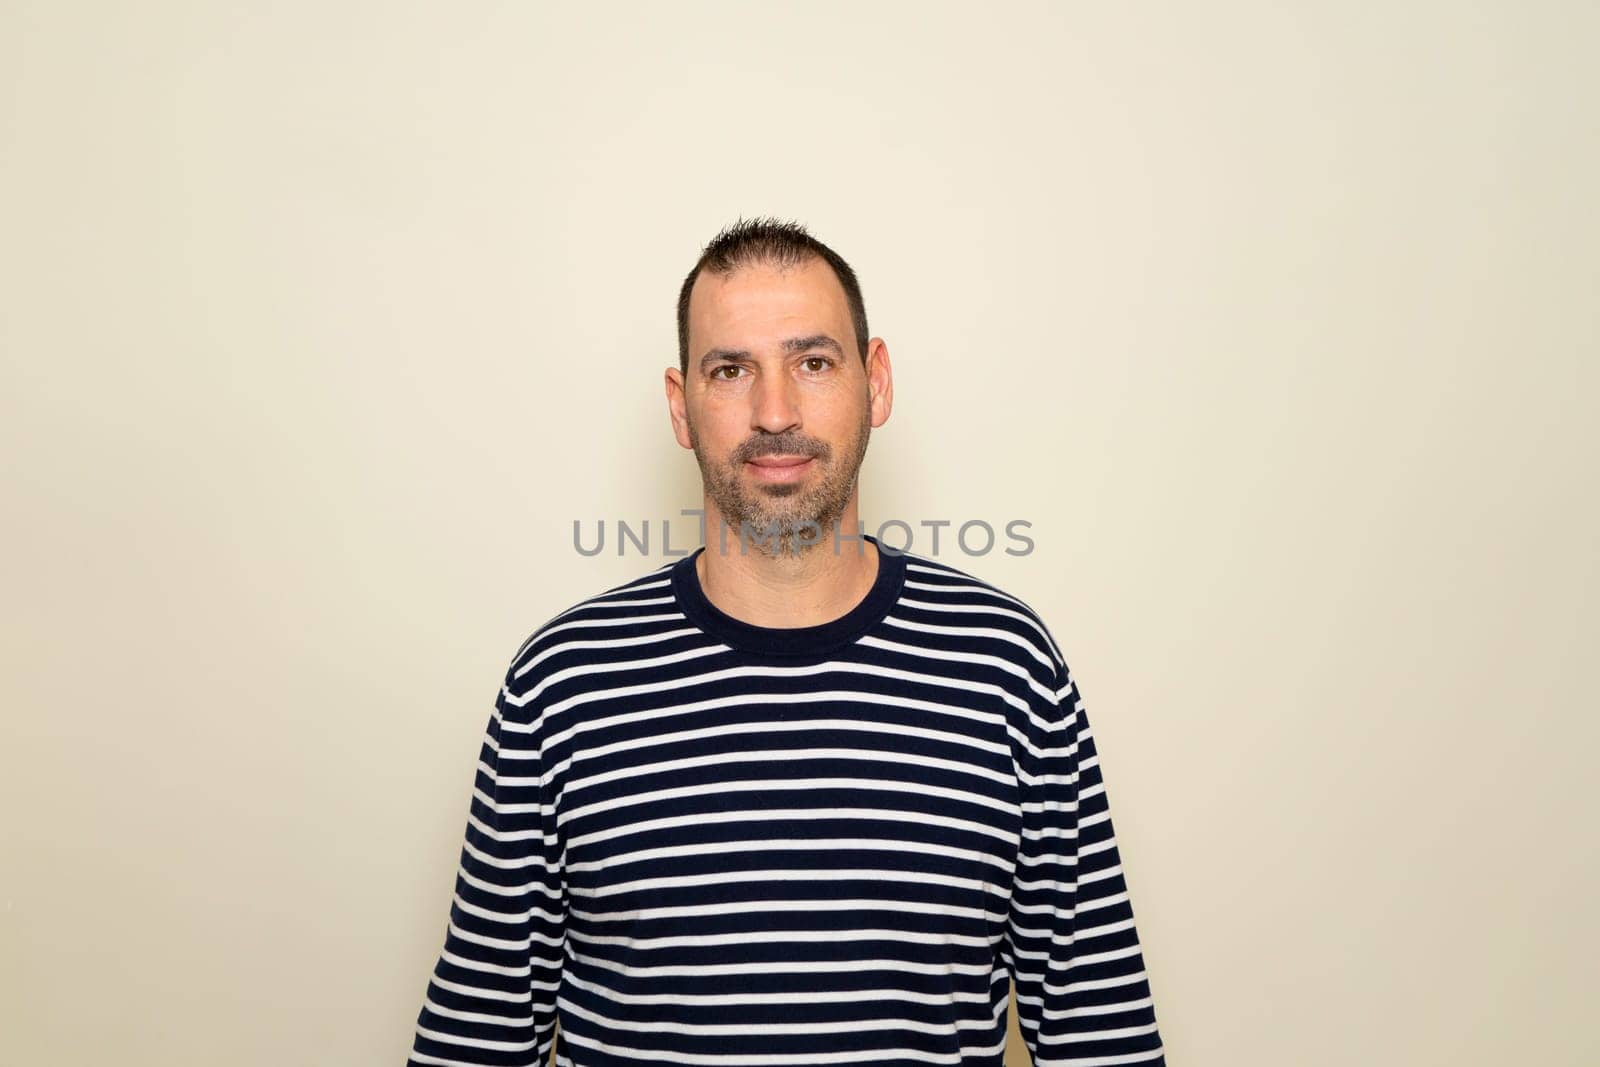 Hispanic man with beard wearing a striped sweater posing smiling on beige studio background. by Barriolo82